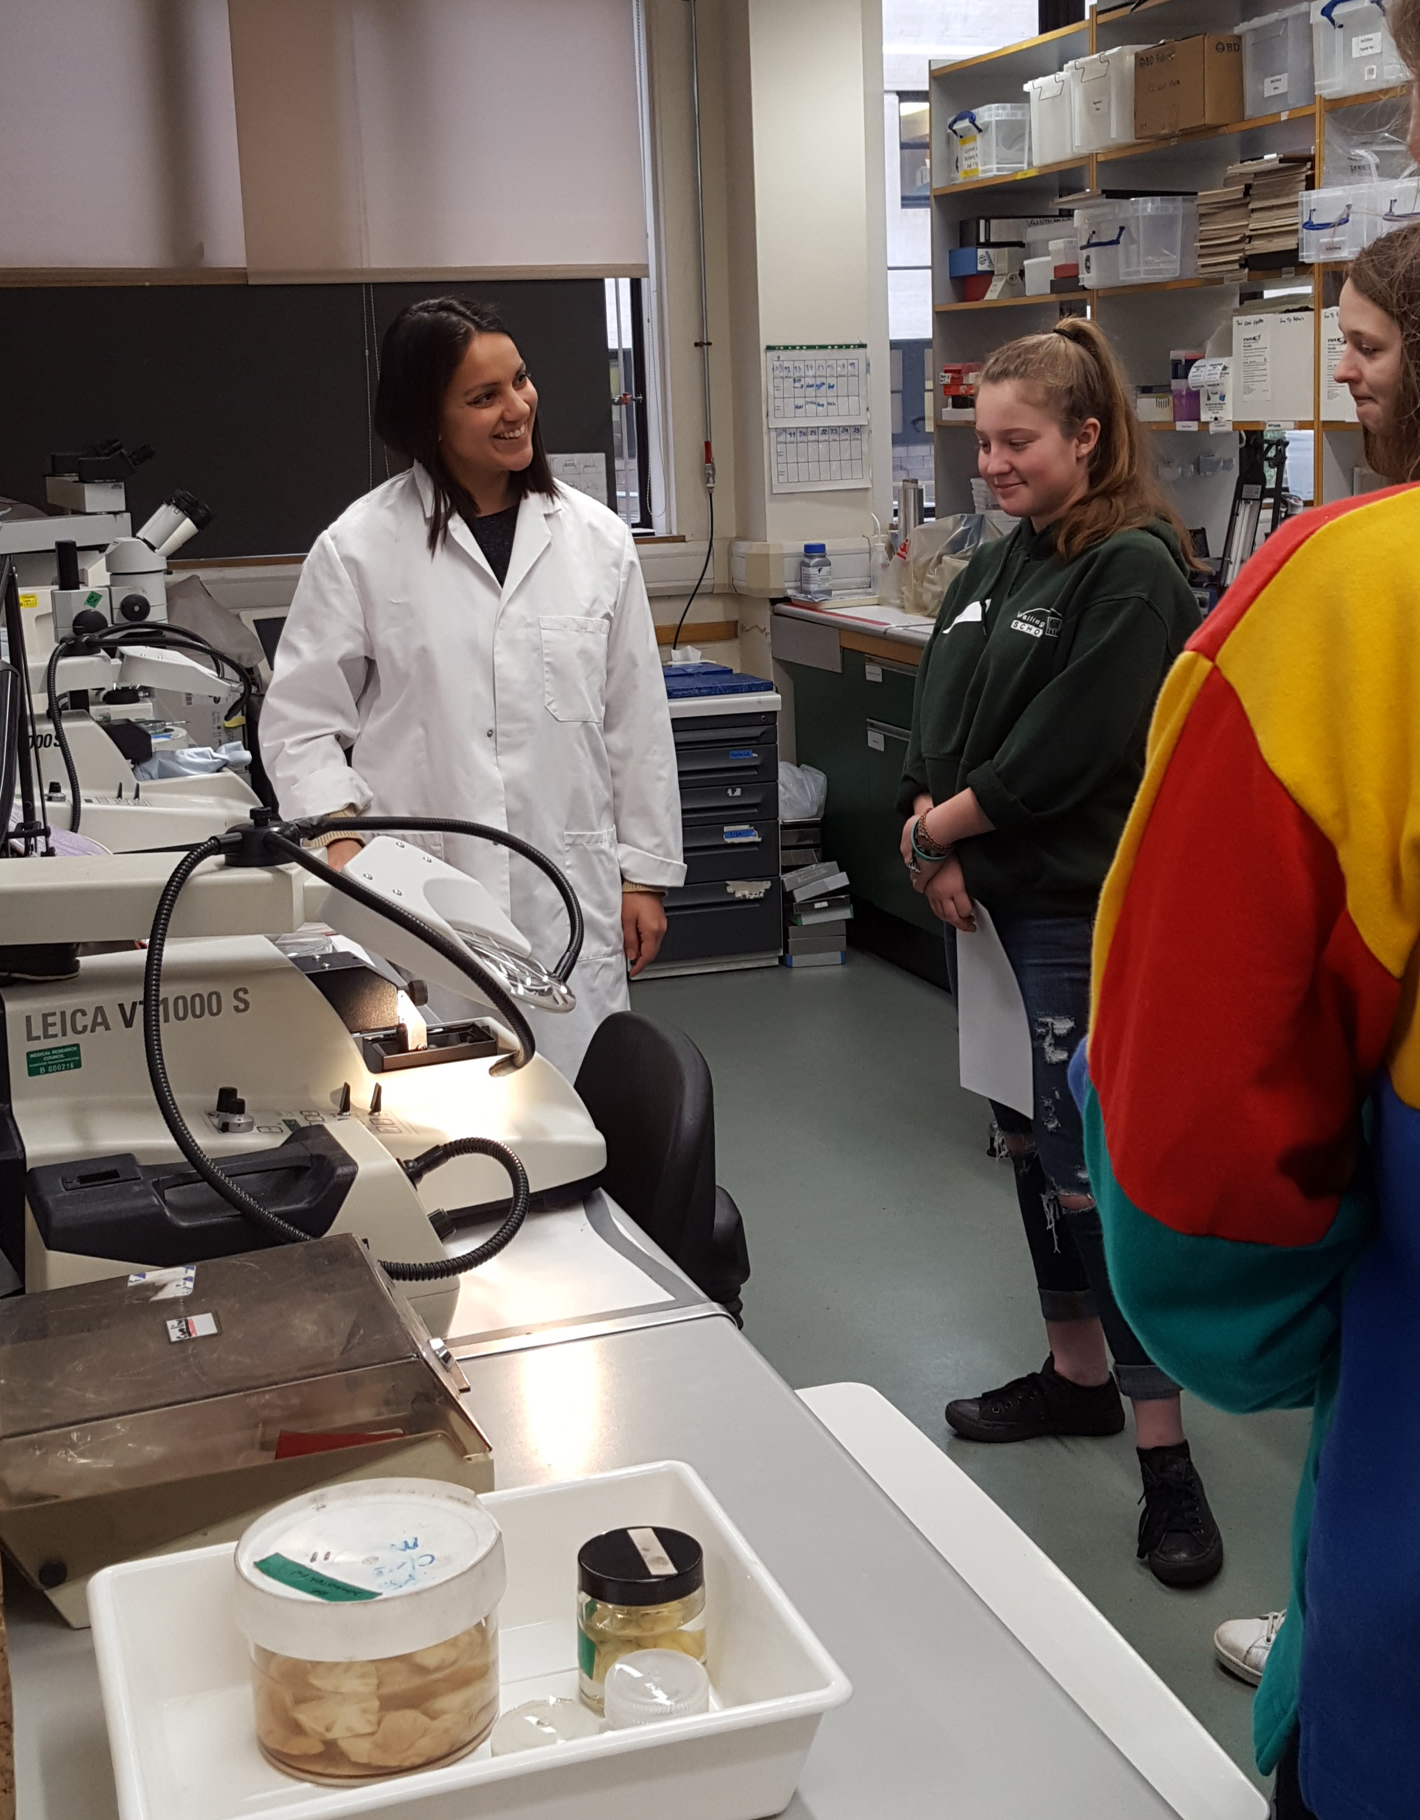 Pupils visited real working labs, where they could see for themselves some of the techniques and technologies used in the Unit’s research on the brain. Here, Unit scientist Dr Emilie Syed shows visiting pupils some of her research on brain structure.